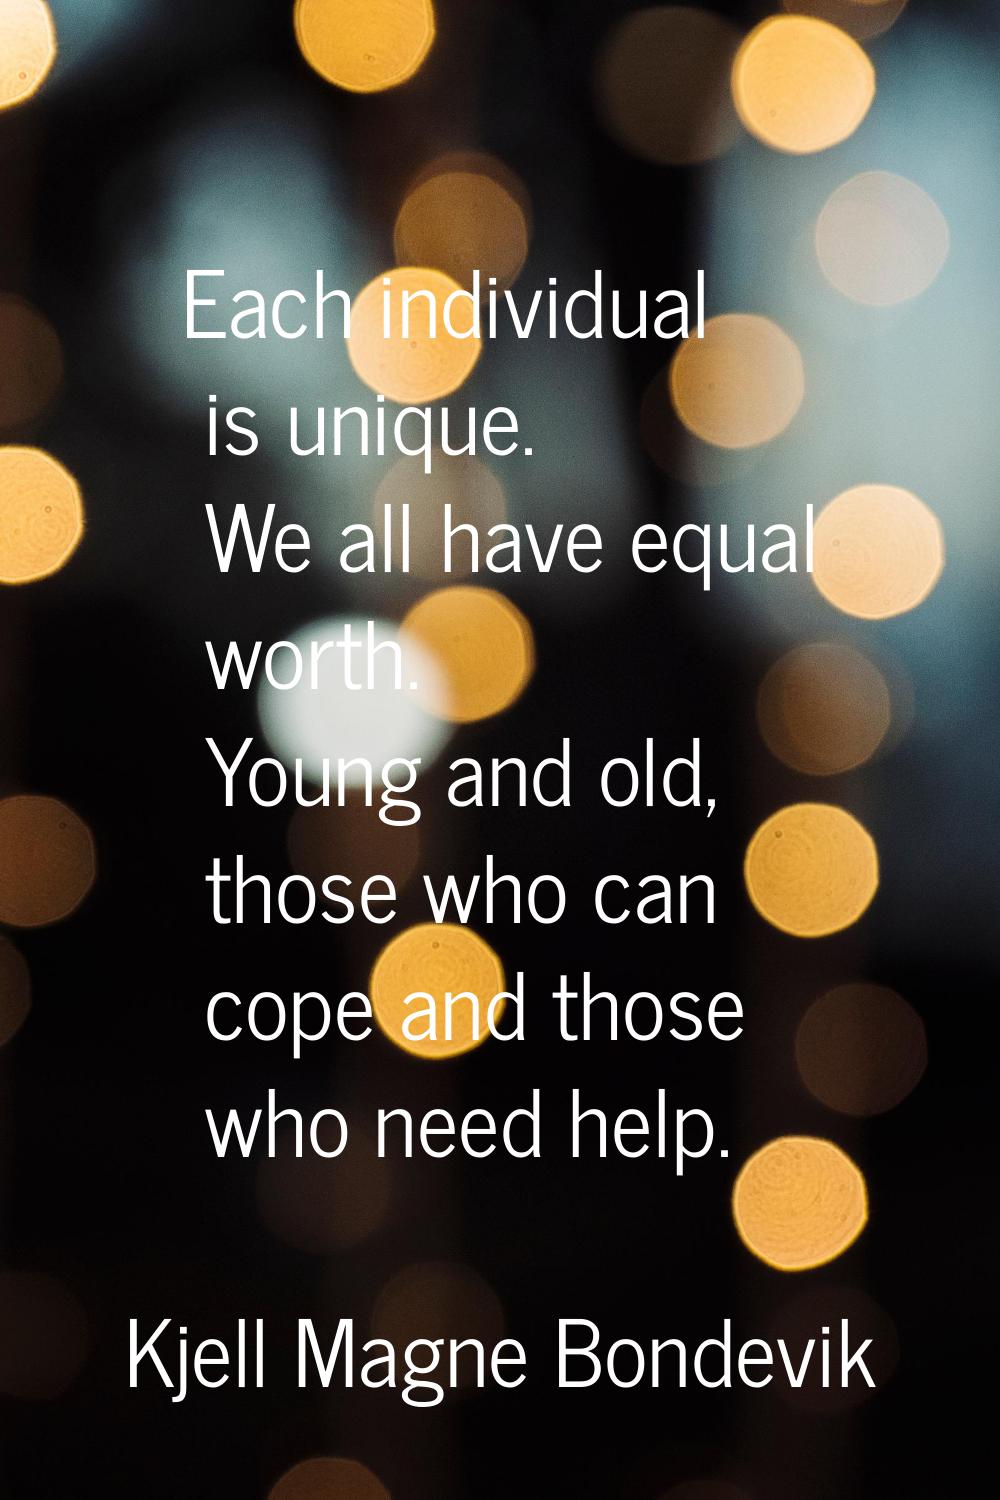 Each individual is unique. We all have equal worth. Young and old, those who can cope and those who